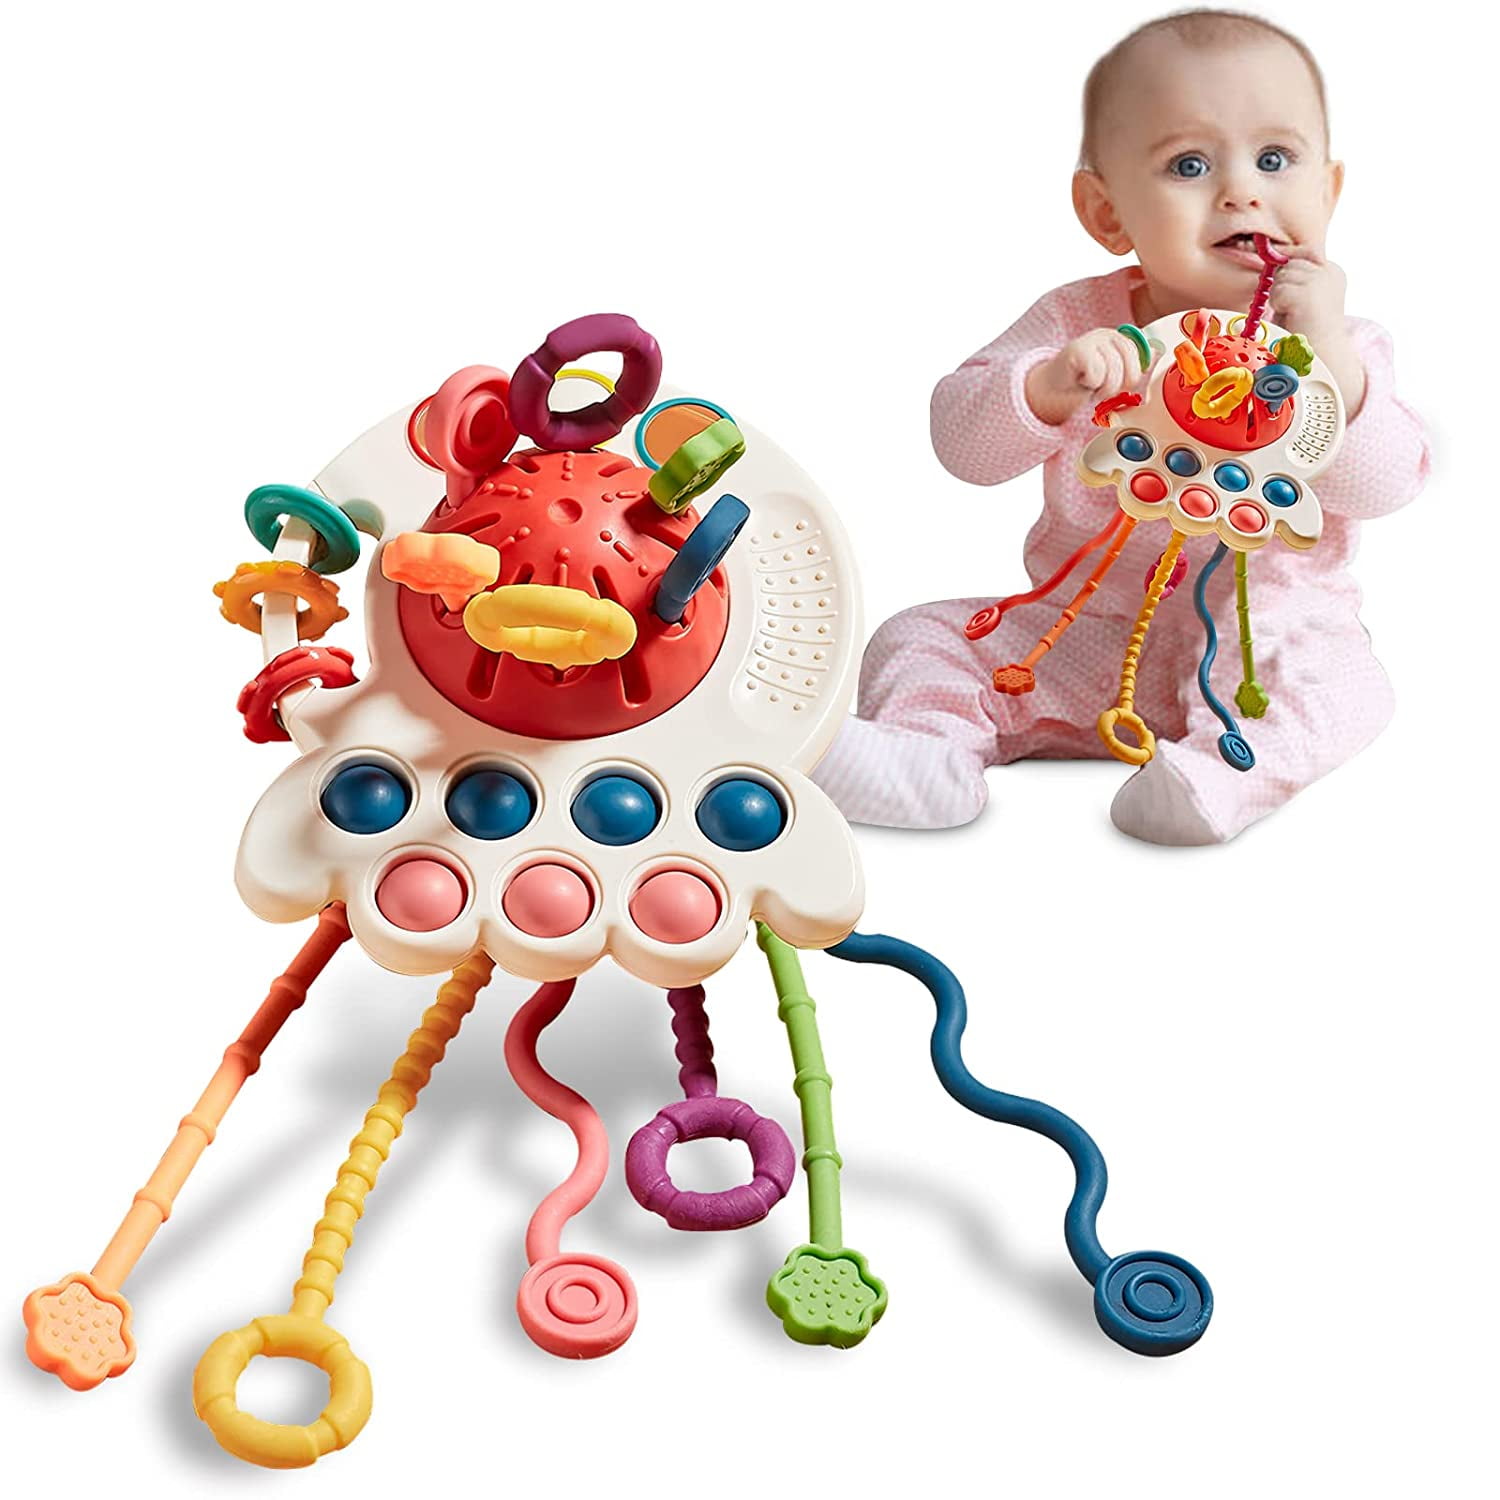 Crislove Baby Toys 6 To 12 Months